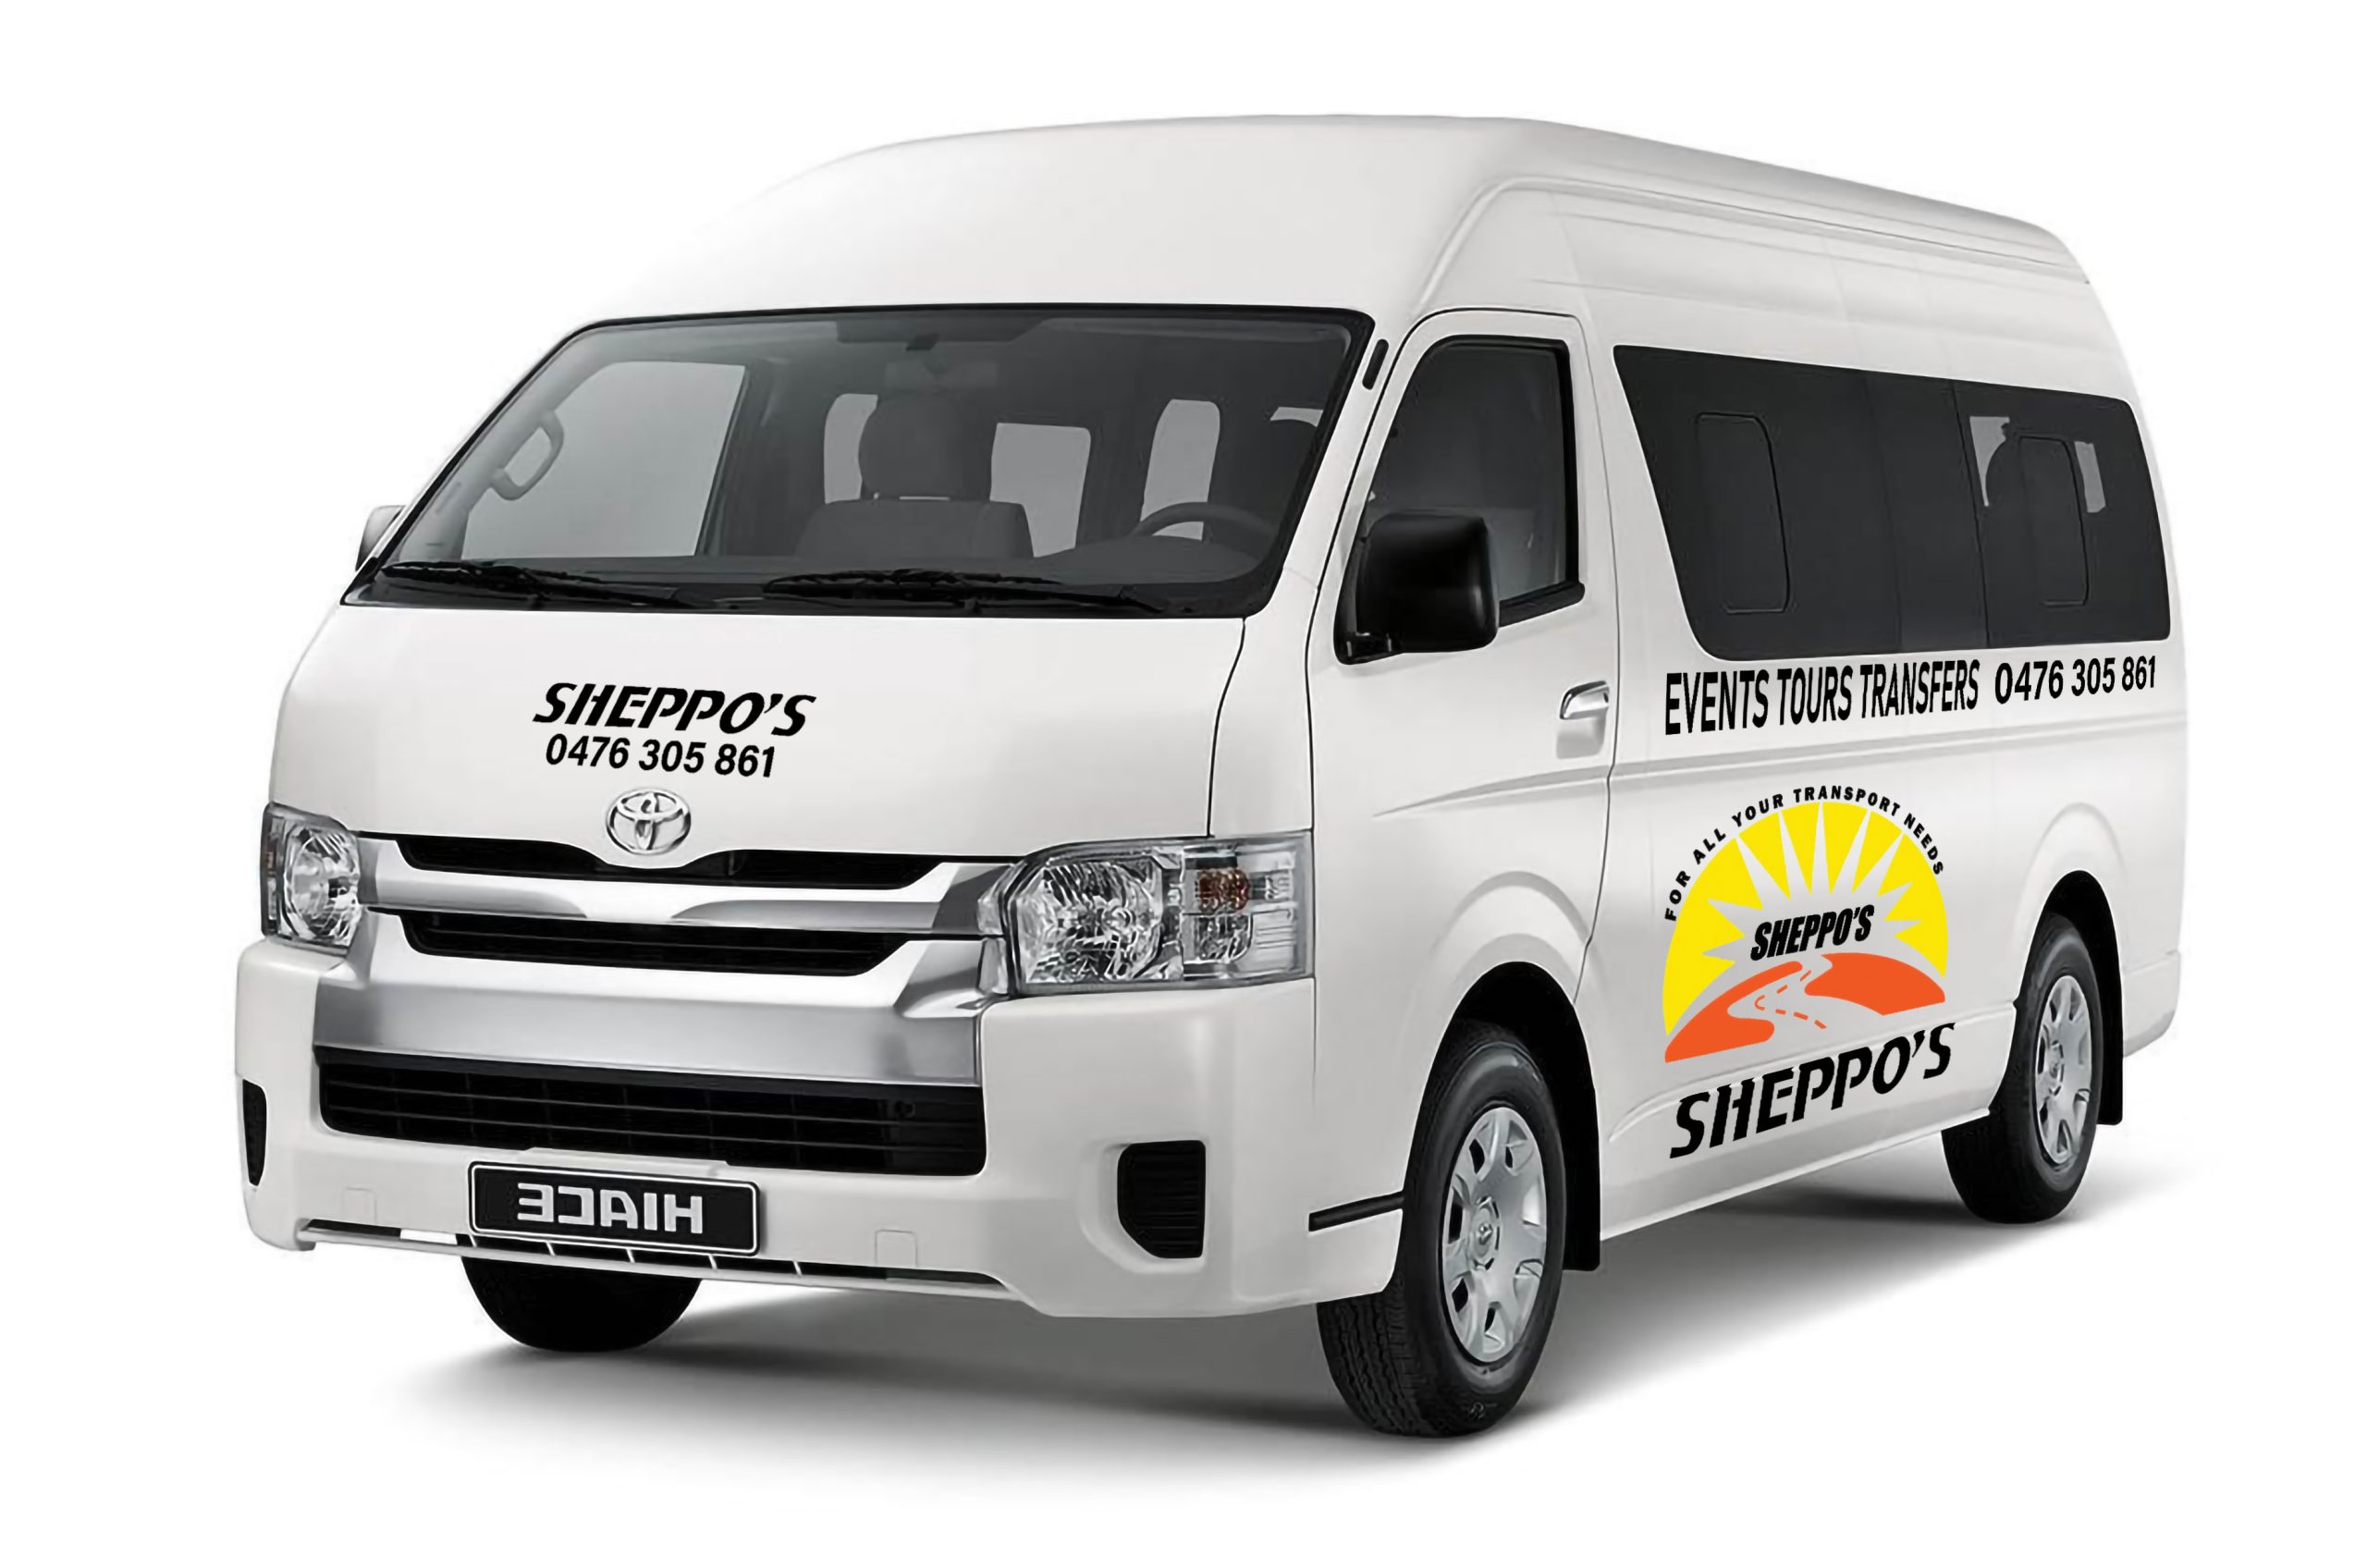 Car hire for airport transfers sydney to wollongong